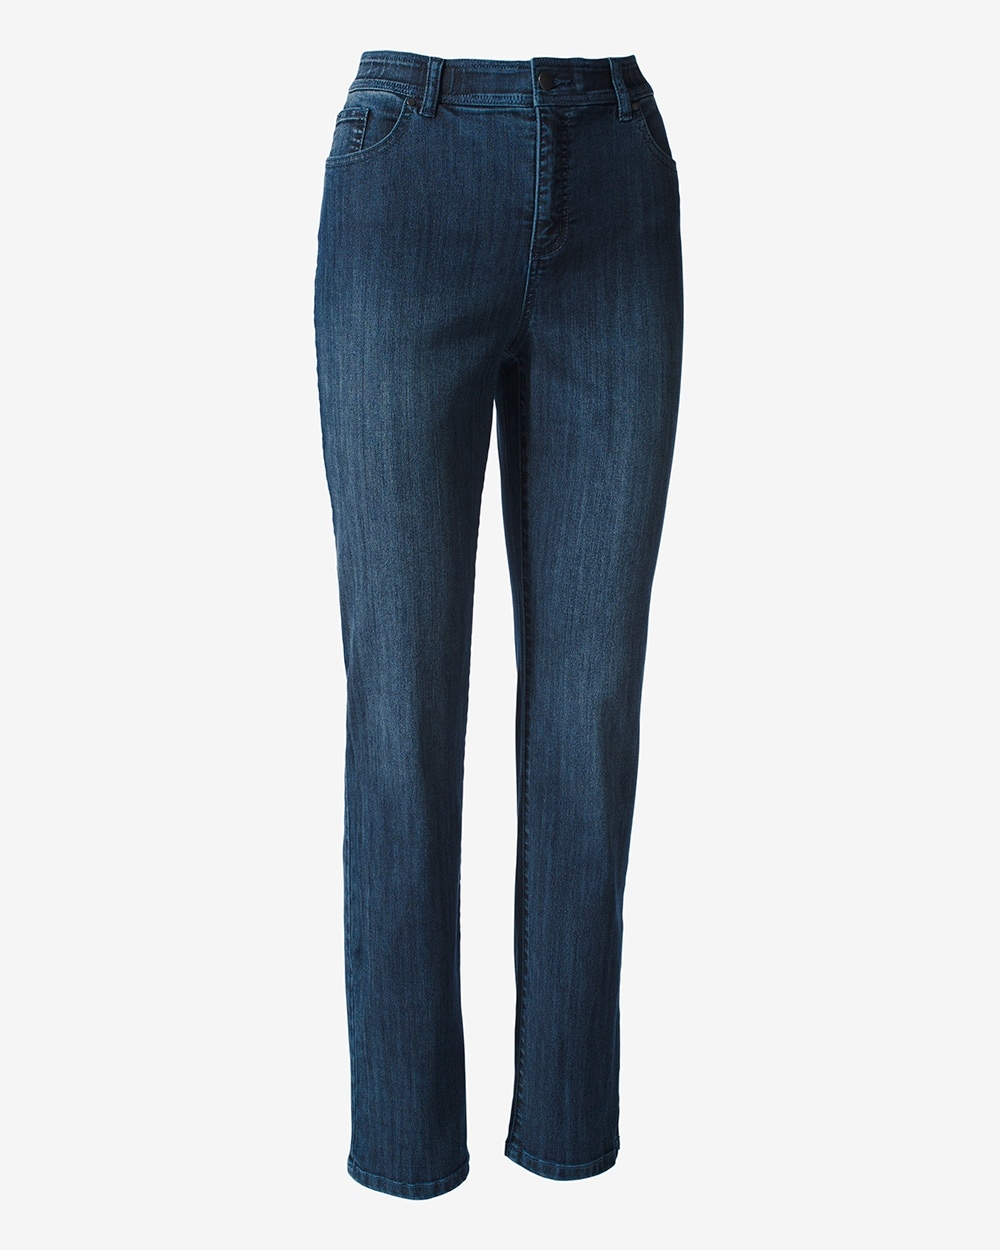 Fabulously Slimming Jeans - Chico's Off The Rack - Chico's Outlet